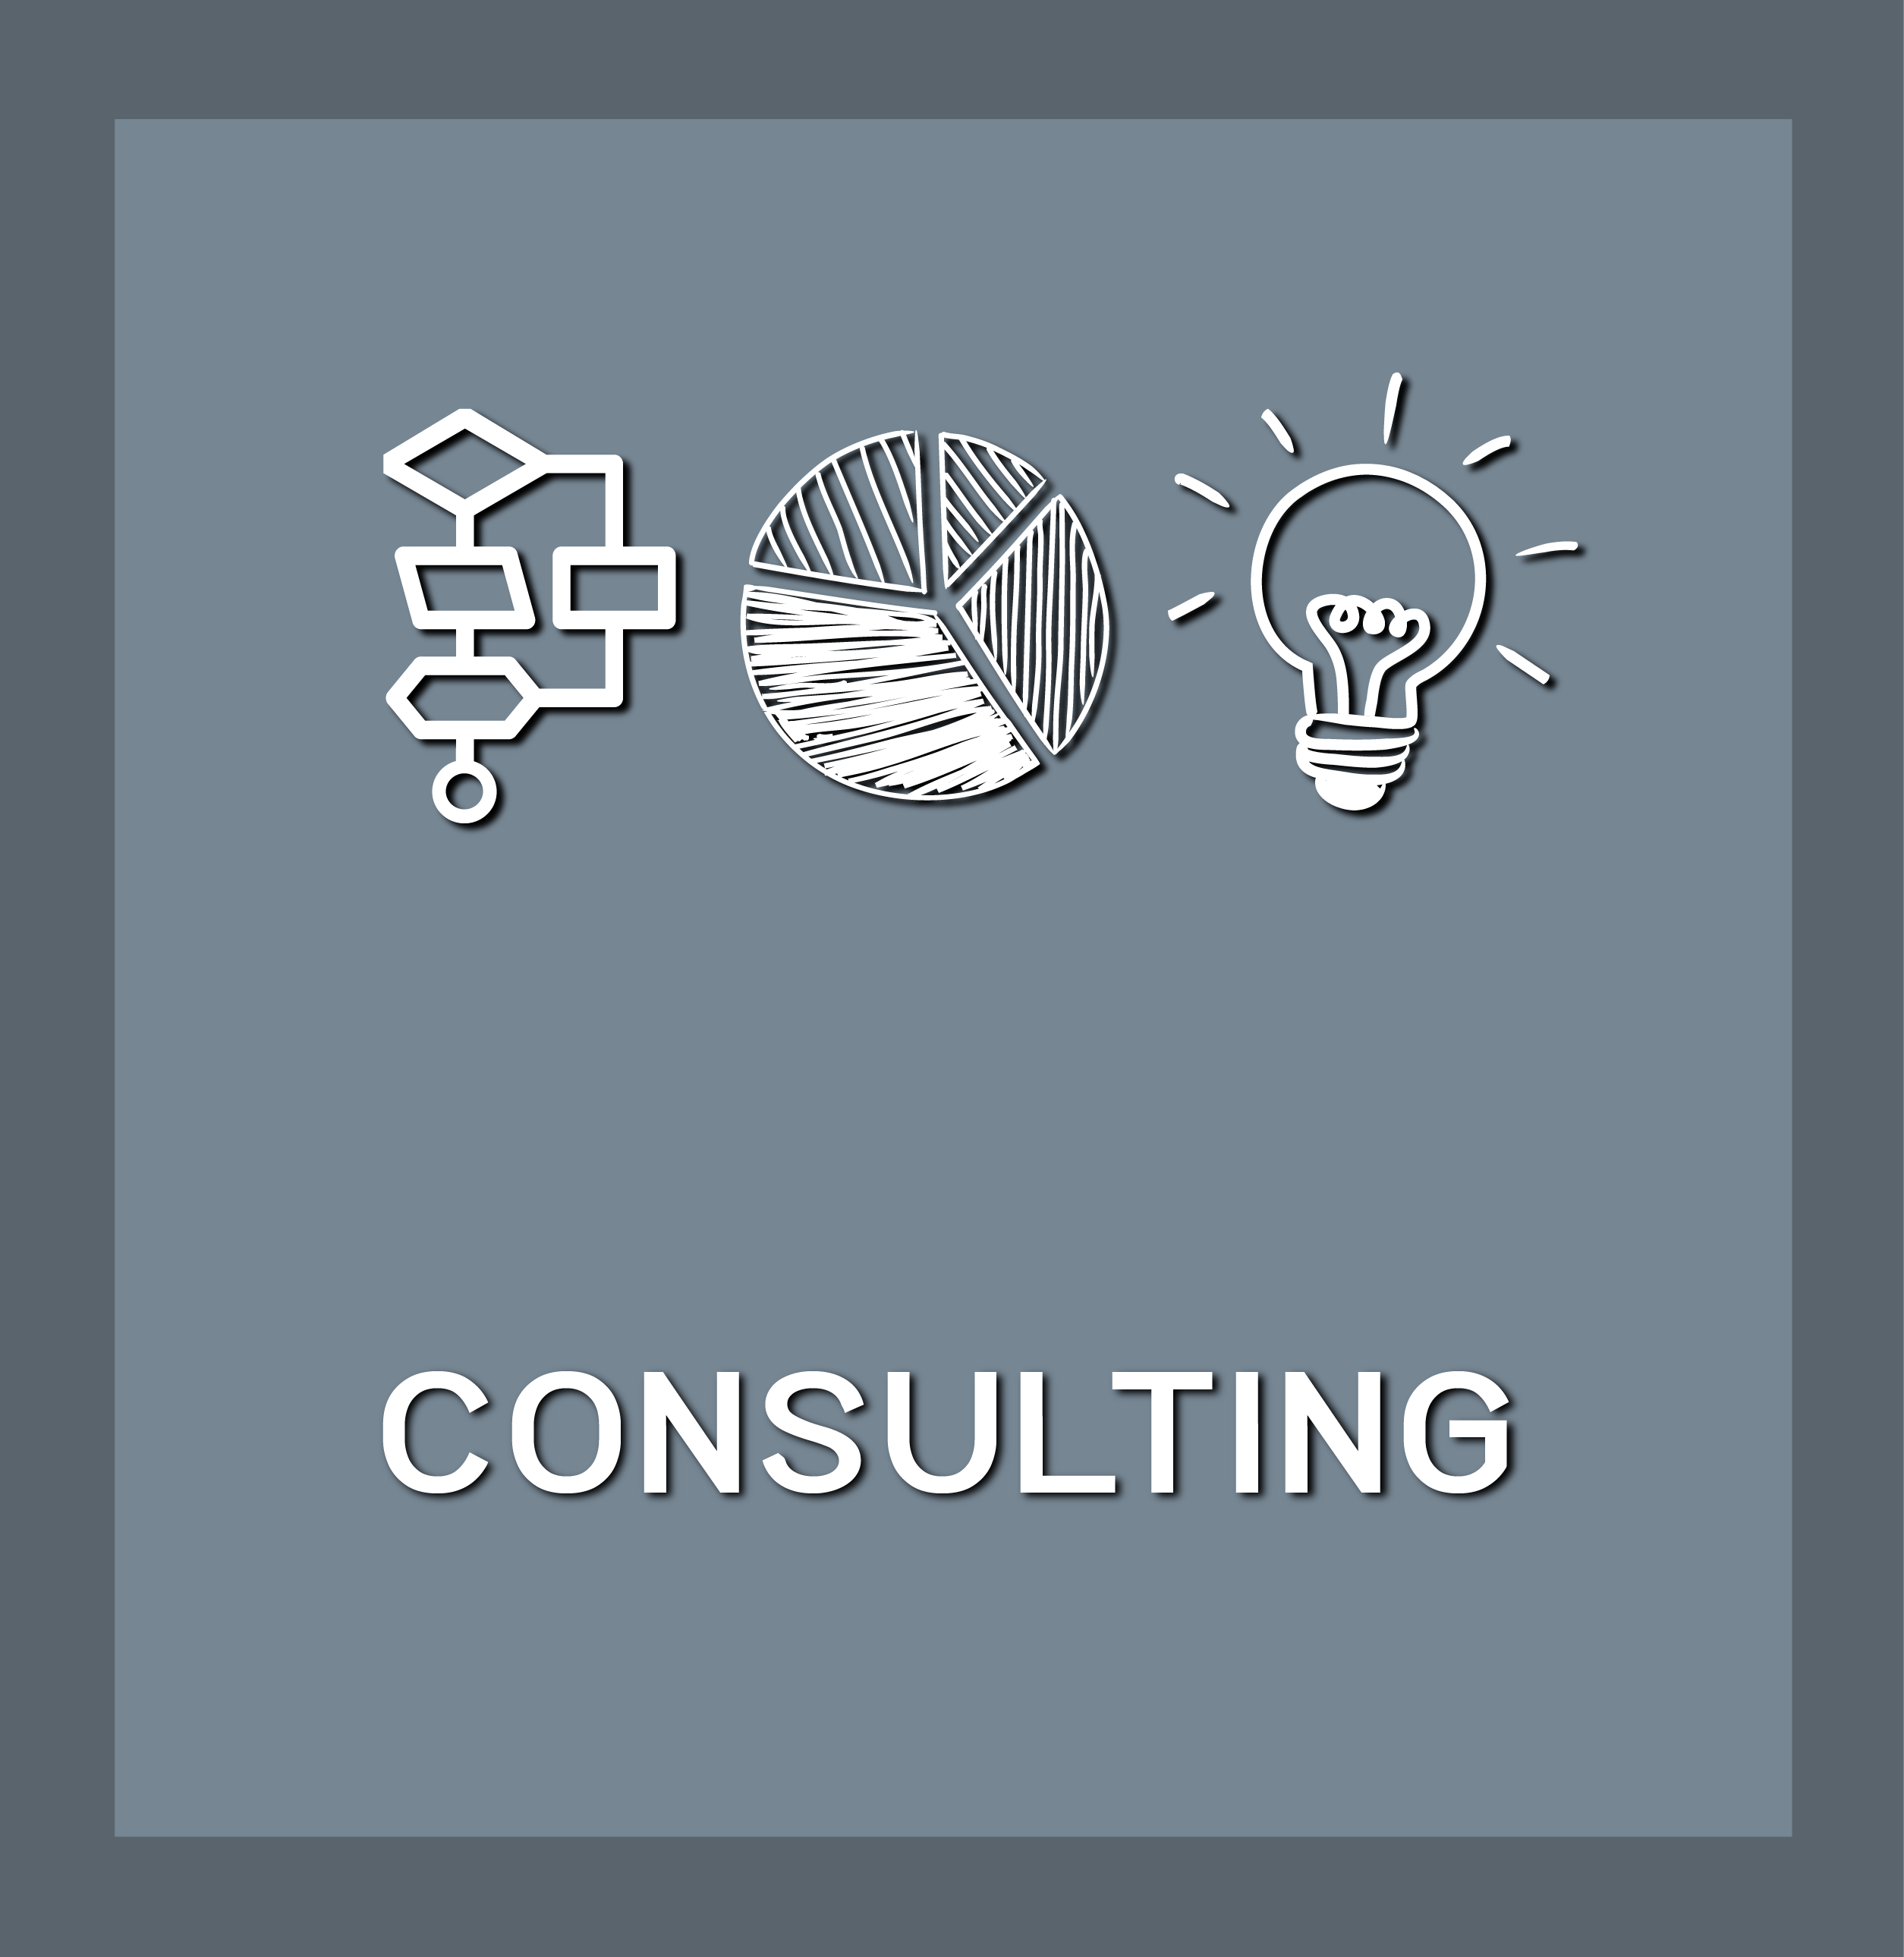 Jimi+Bernie | Business Consulting Services